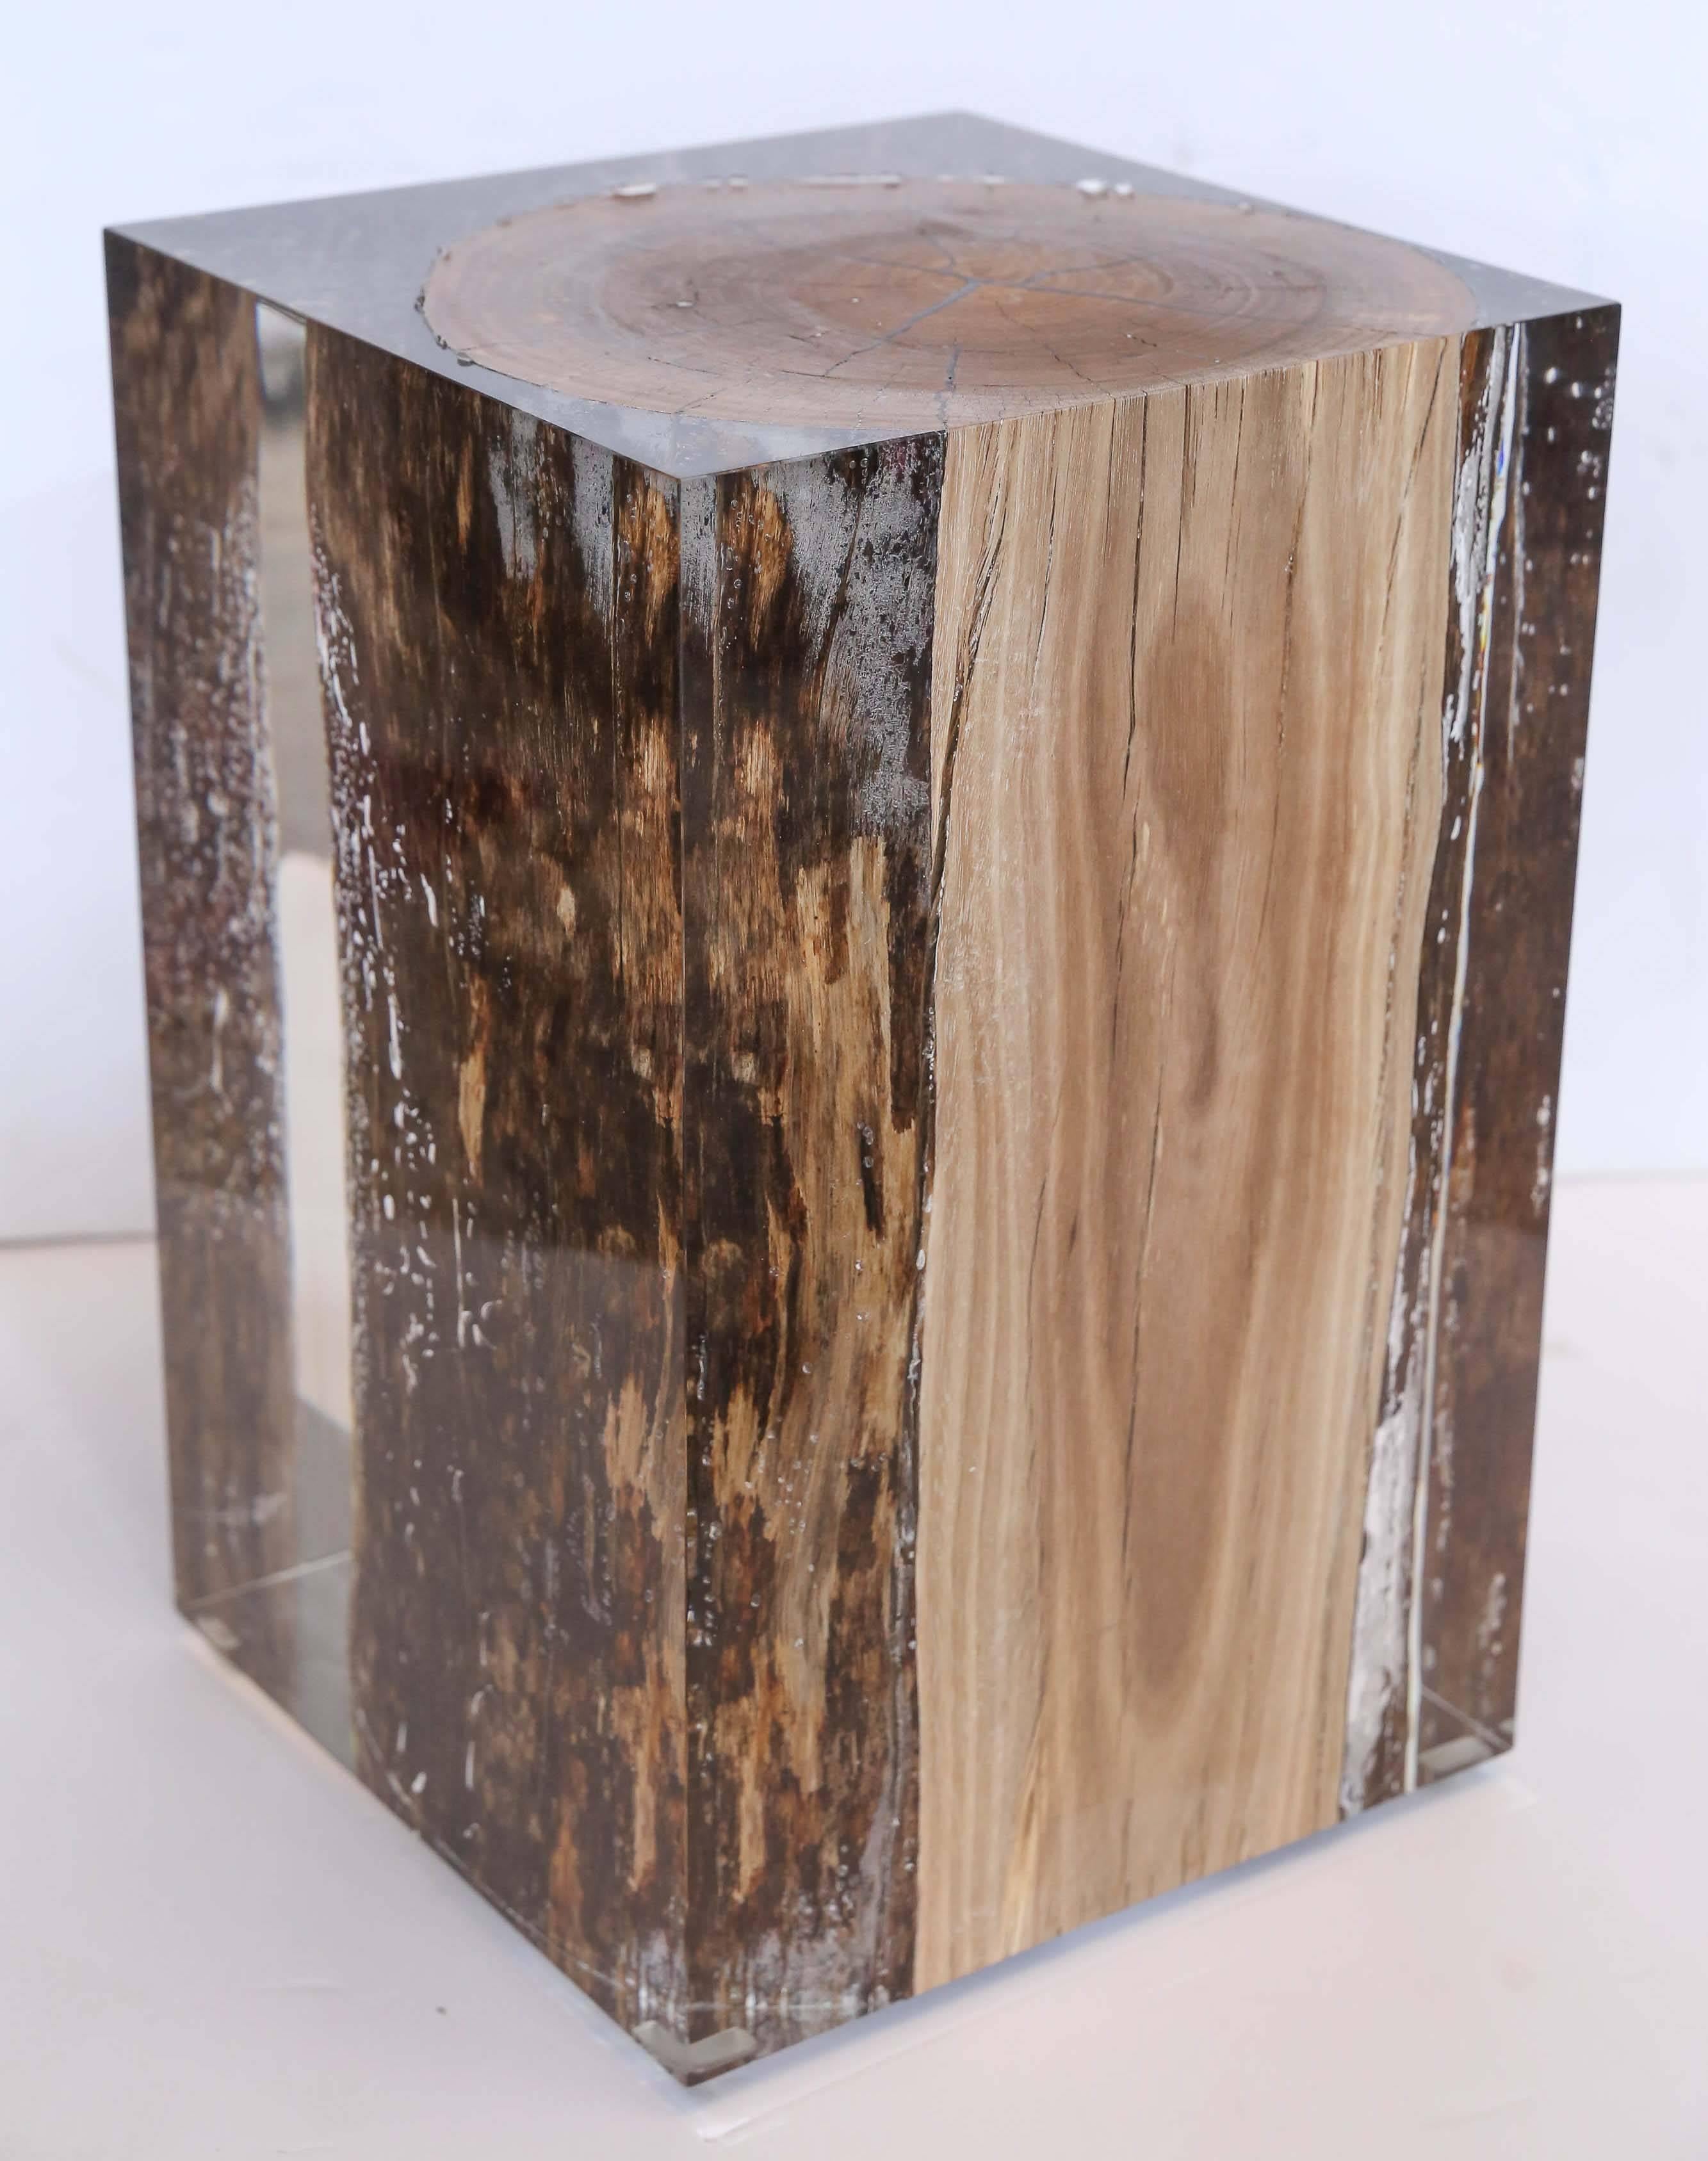 Handcrafted acrylic glass embedded with a driftwood trunk that is sized either as a side table or seating as a stool or ottoman. Cut, sanded and hand polished to a perfect transparency. Consider it a work of art that you can also sit on and includes